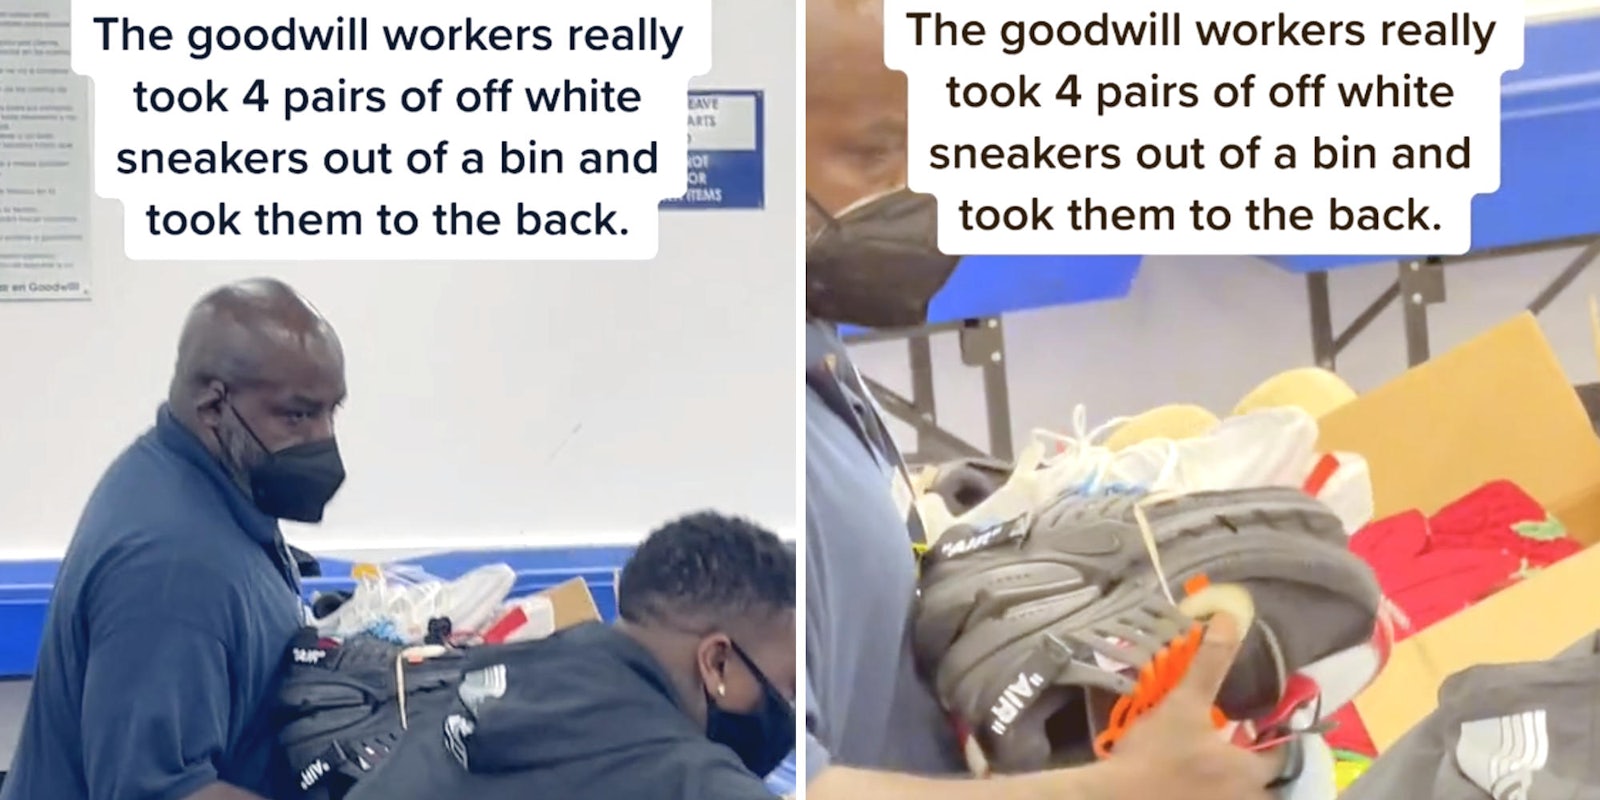 goodwill employee handling shoes and carrying them to a bin